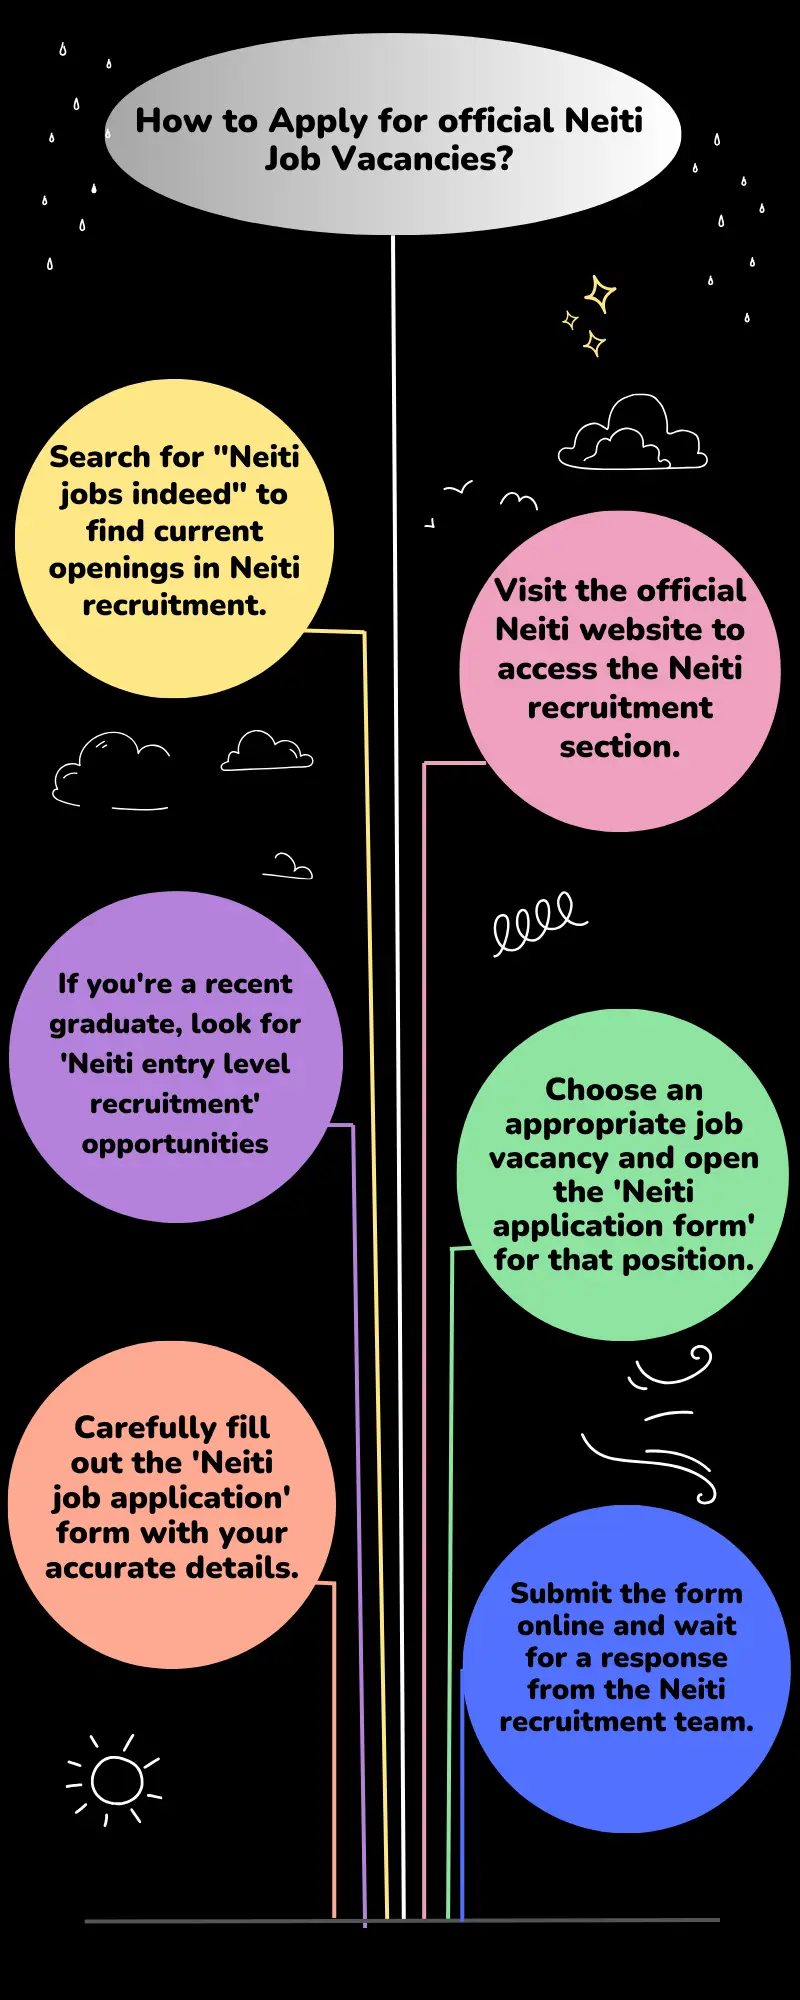 How to Apply for official Neiti Job Vacancies?